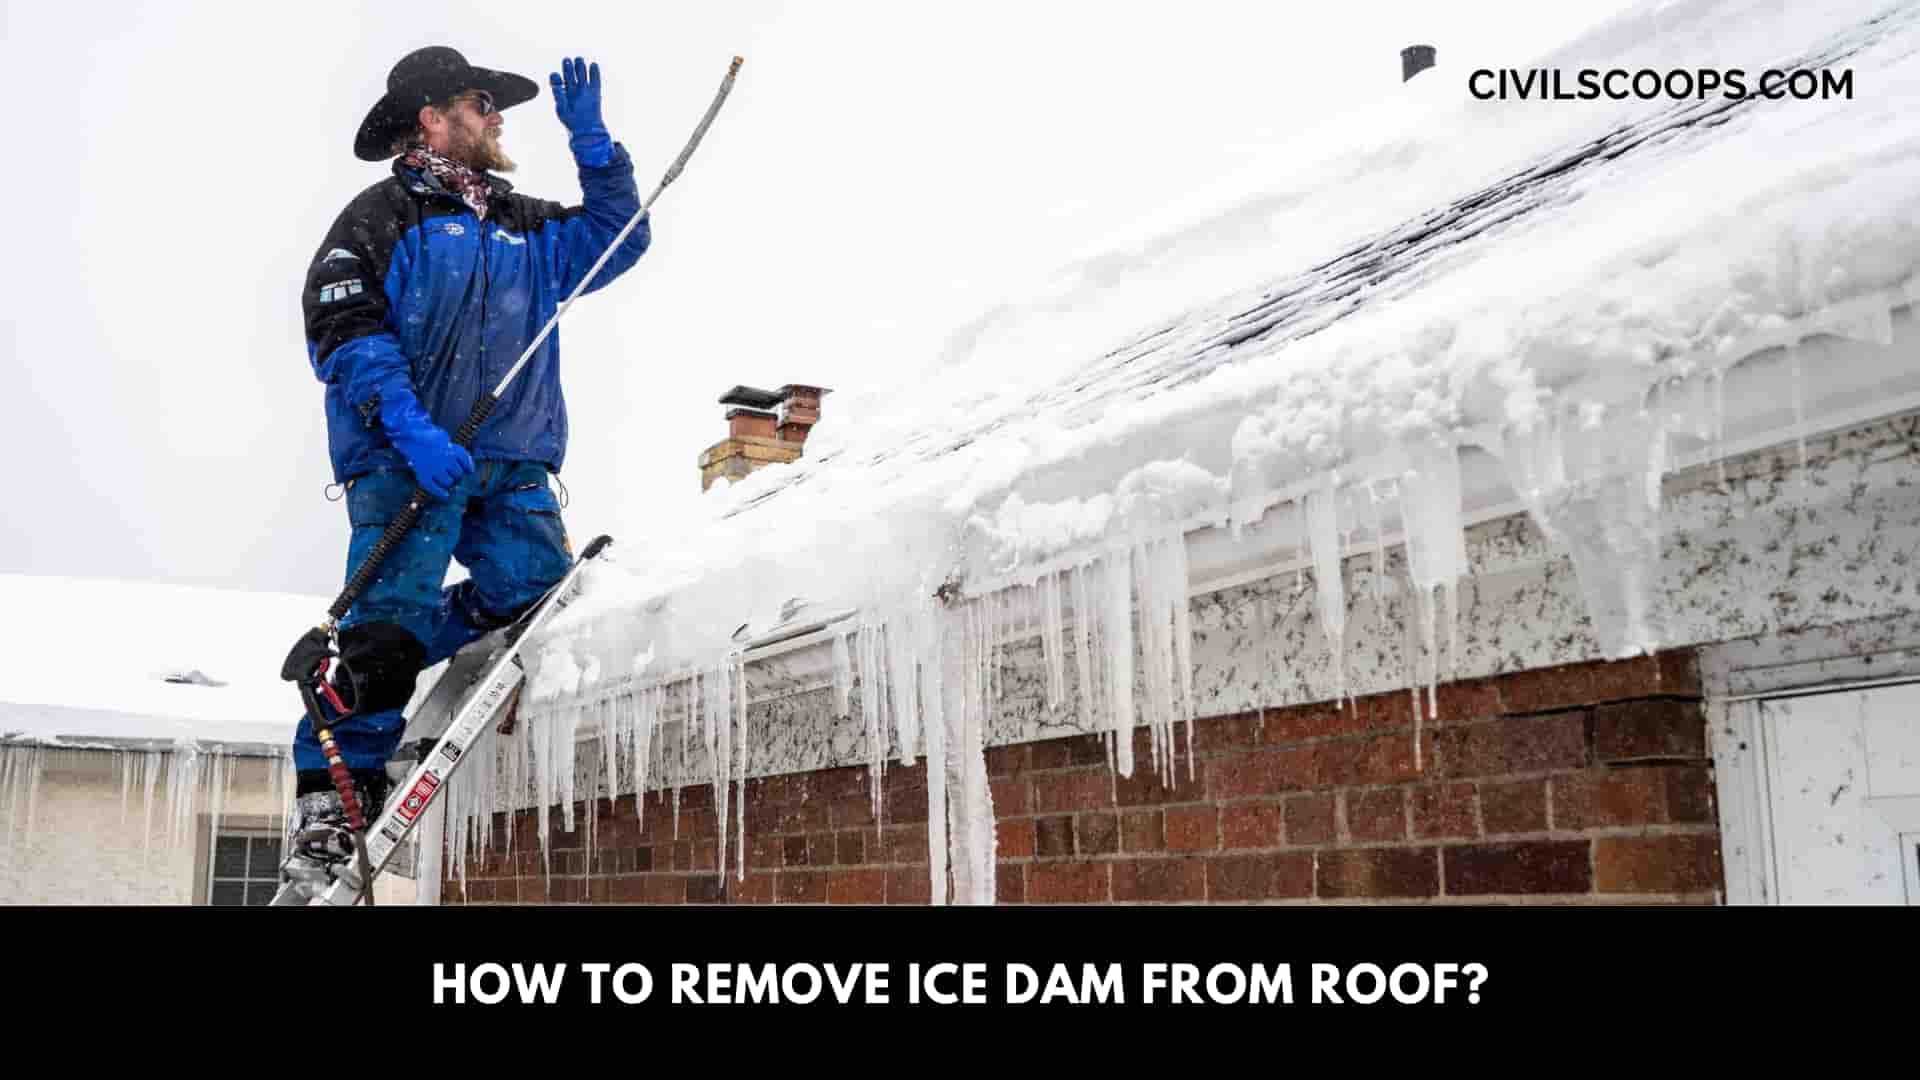 How to Remove Ice Dam From Roof?